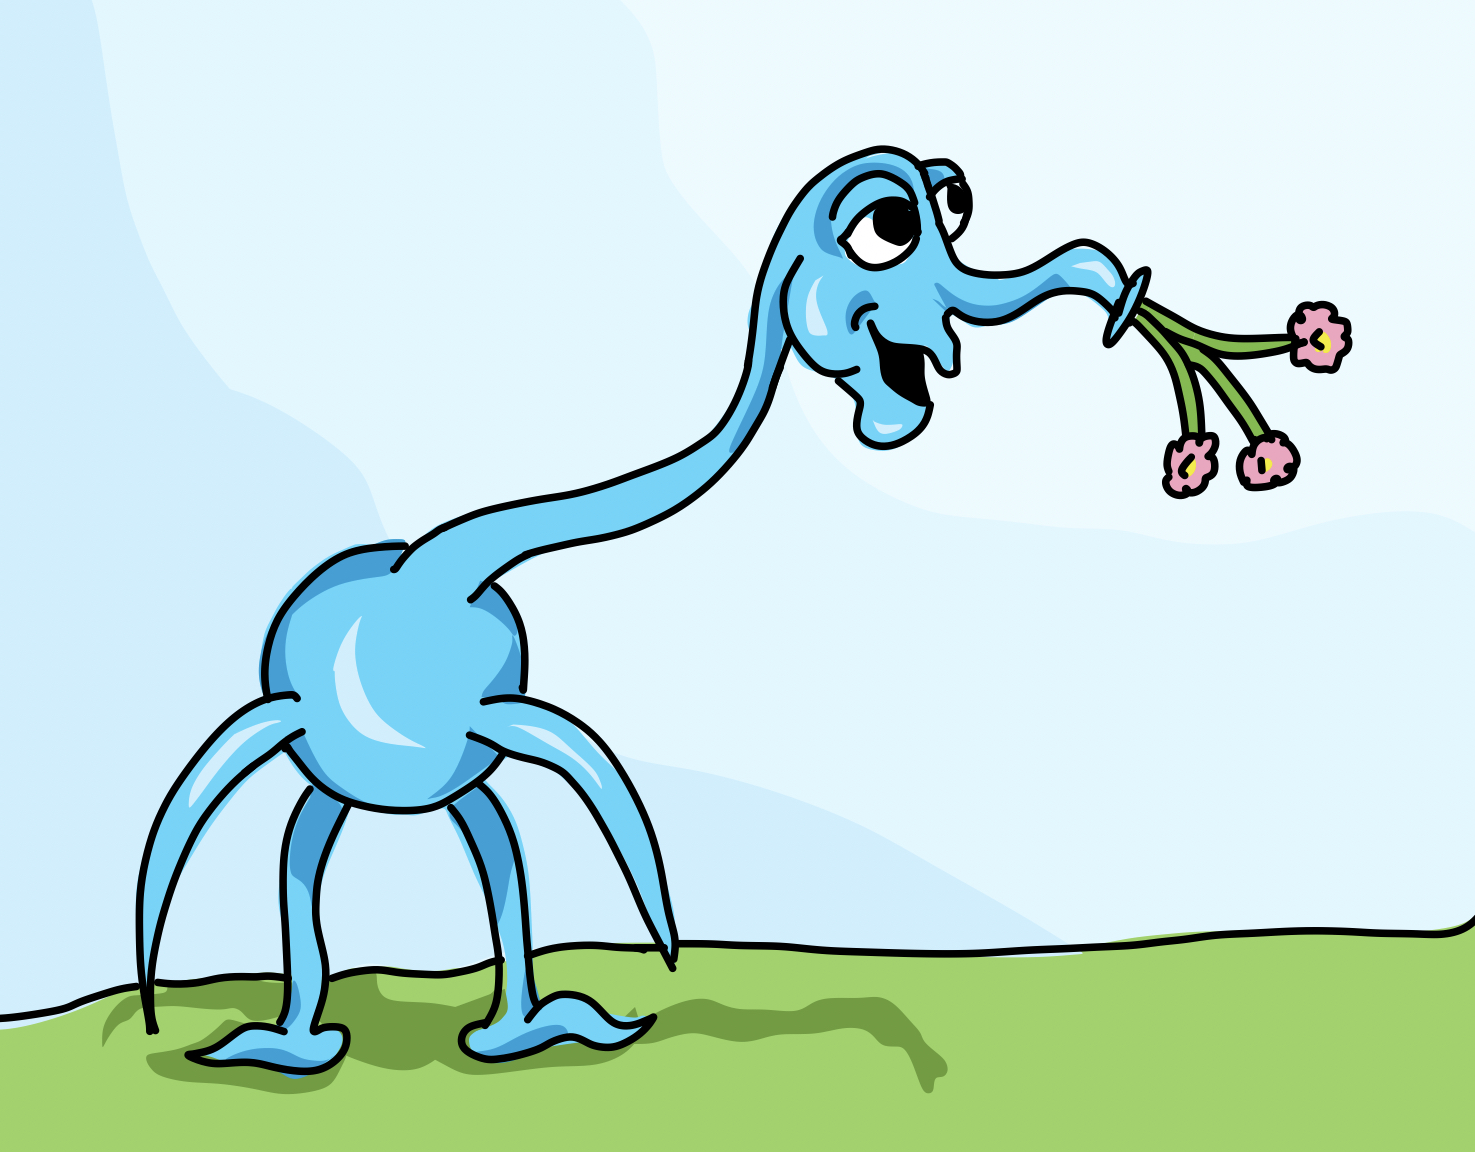 A blue monster with a long neck and trunk-like nose that has a bouquet of flowers coming out of its nose